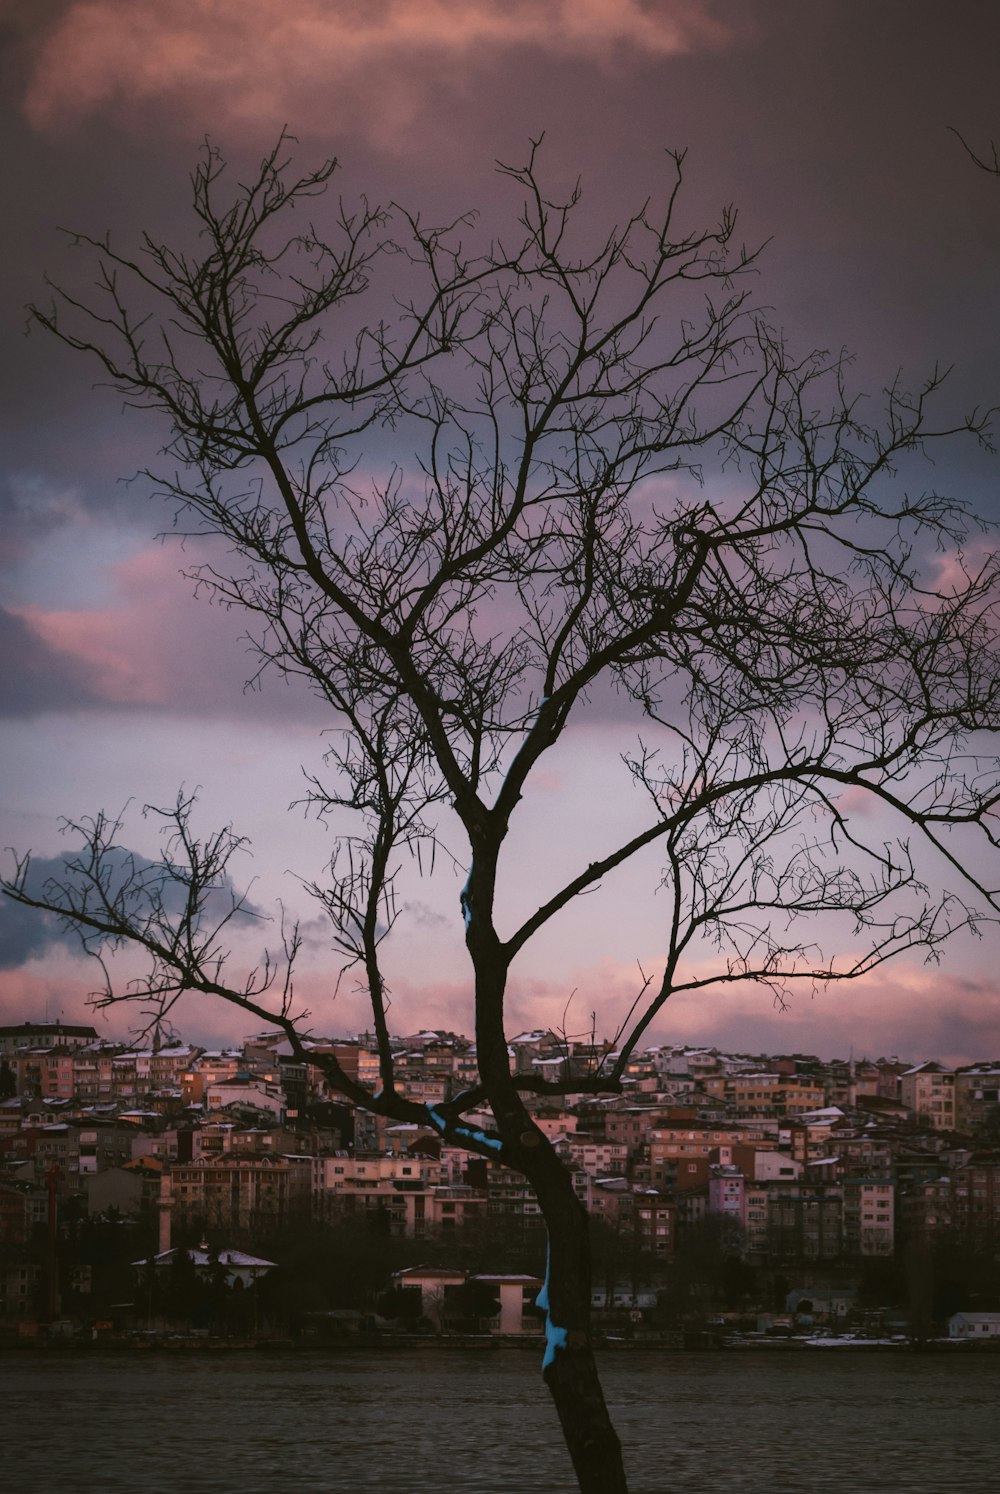 bare tree near city buildings under cloudy sky during daytime